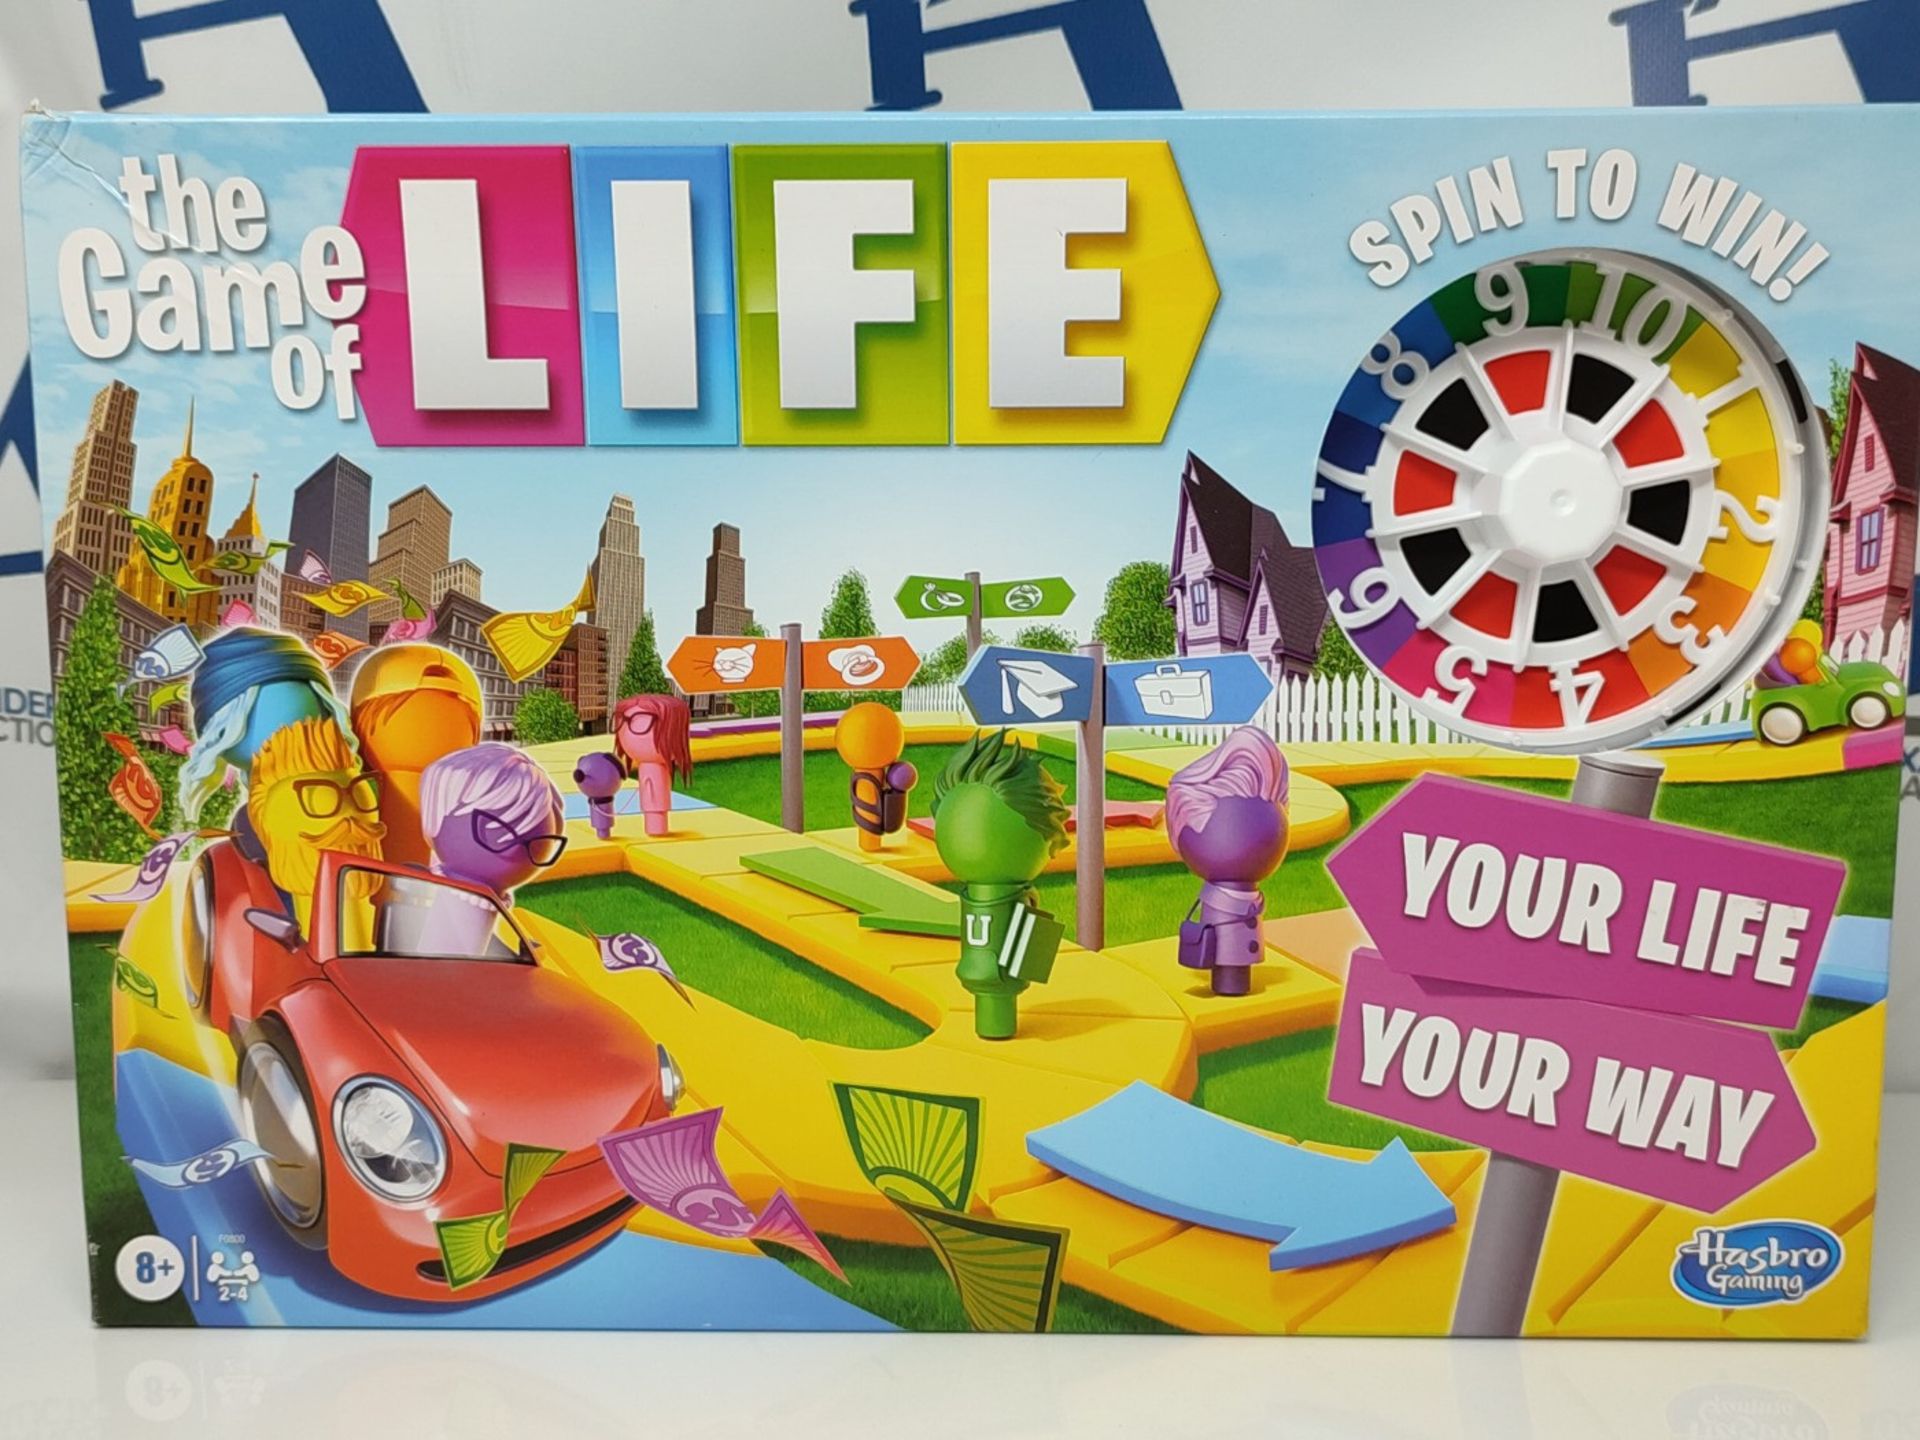 Hasbro Gaming The Game of Life Game, Family Board Game for 2 to 4 Players, for Kids Ag - Image 2 of 3